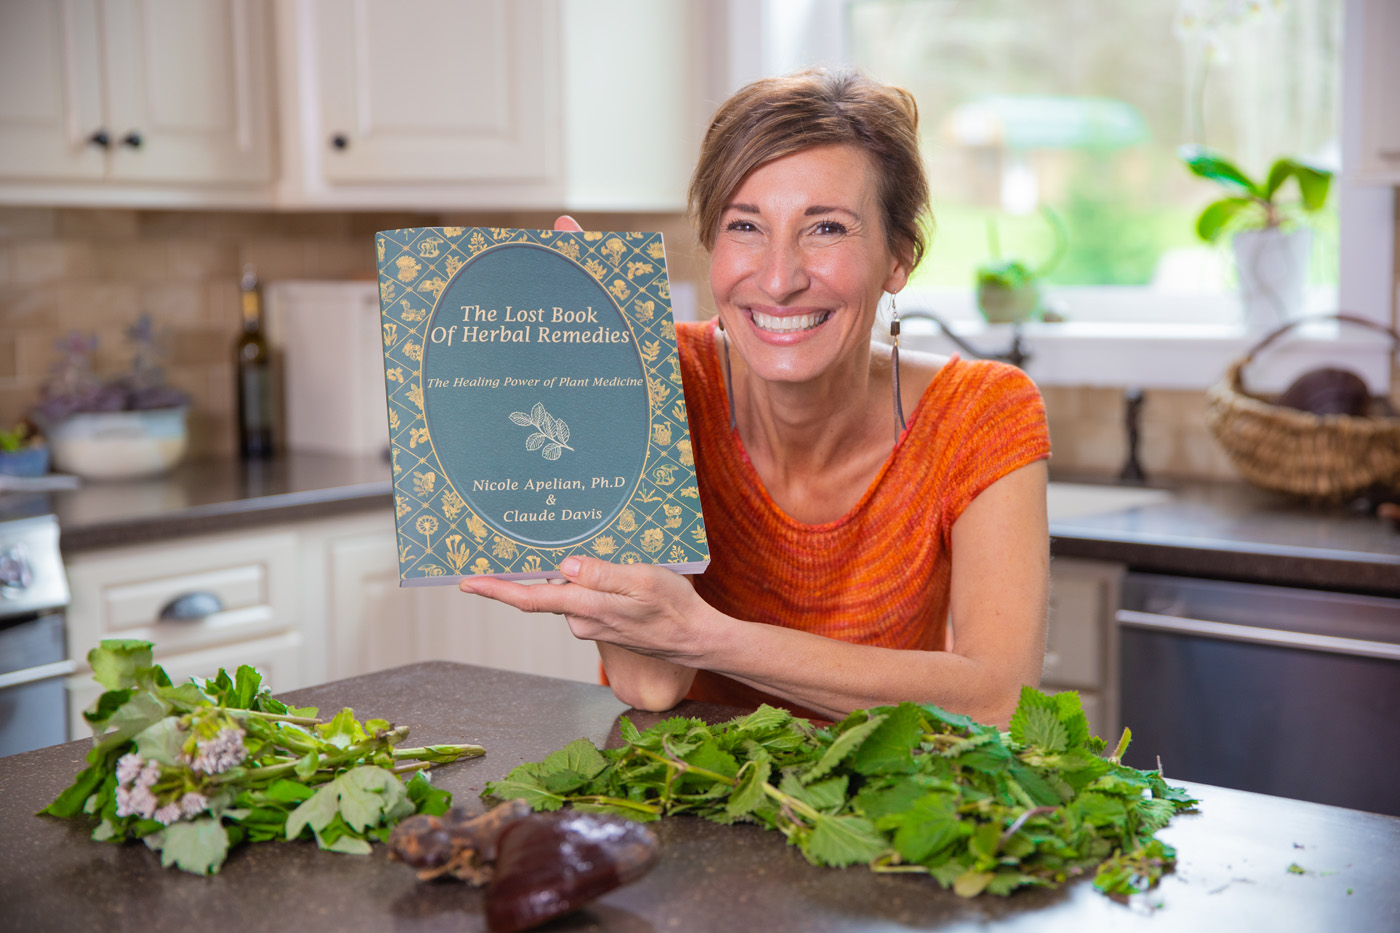 nicole apelian holding the lost book of herbal remedies